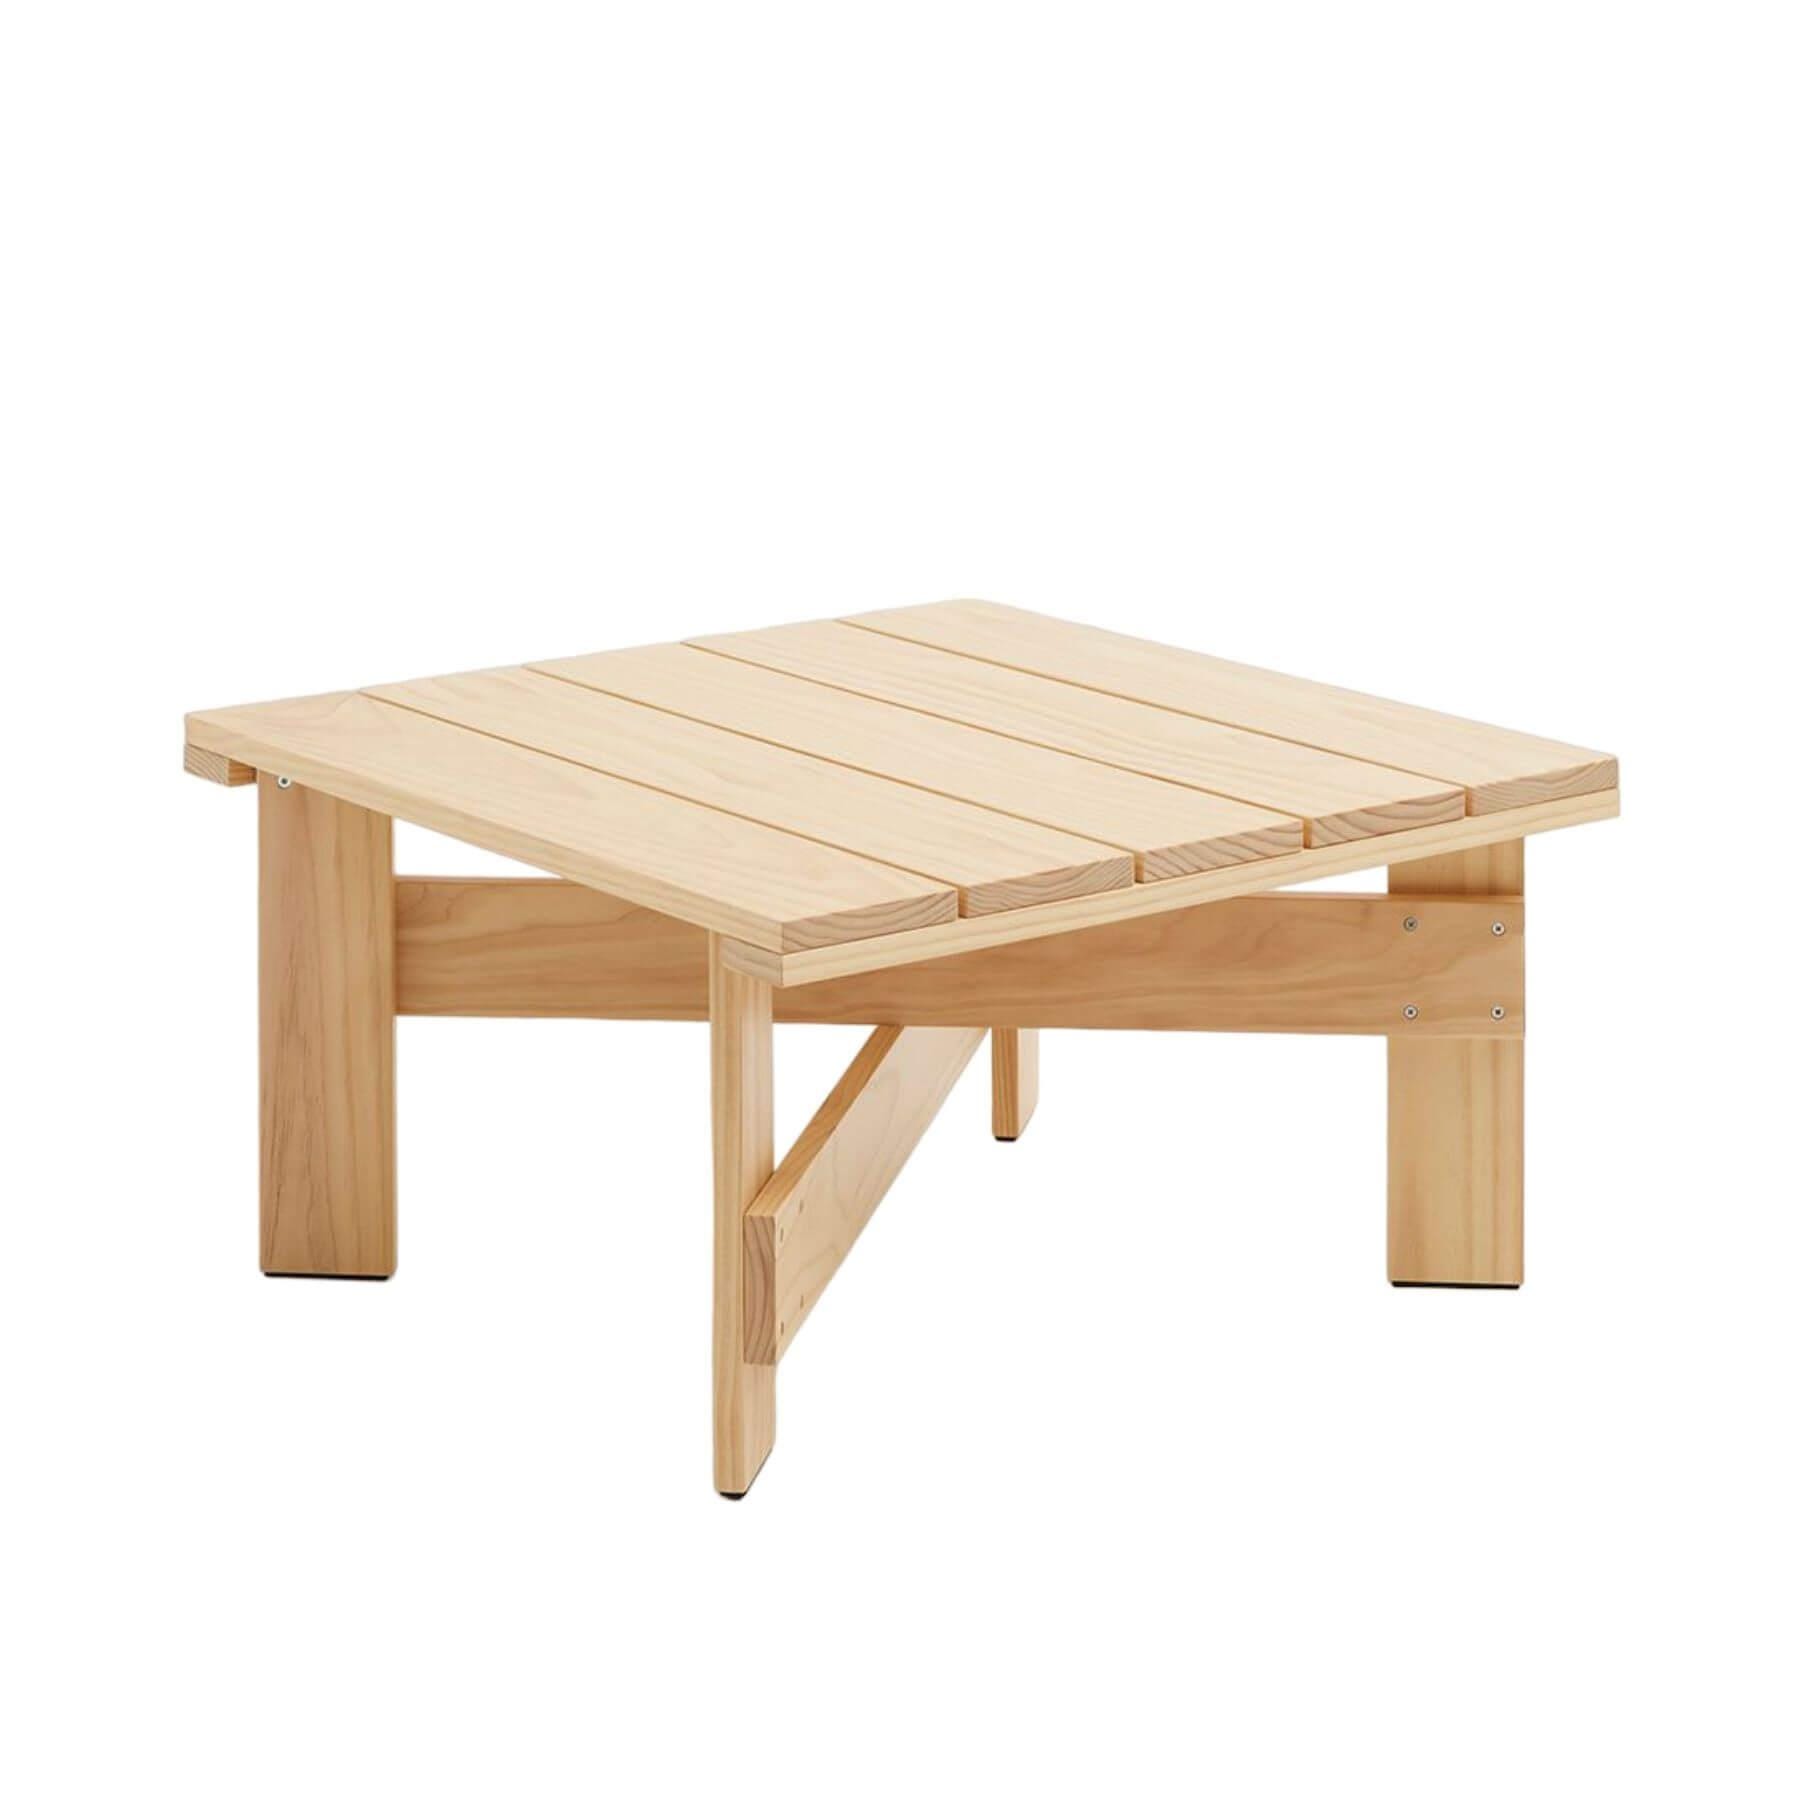 Hay Crate Low Table 75 X 75 Pinewood Light Wood Designer Furniture From Holloways Of Ludlow